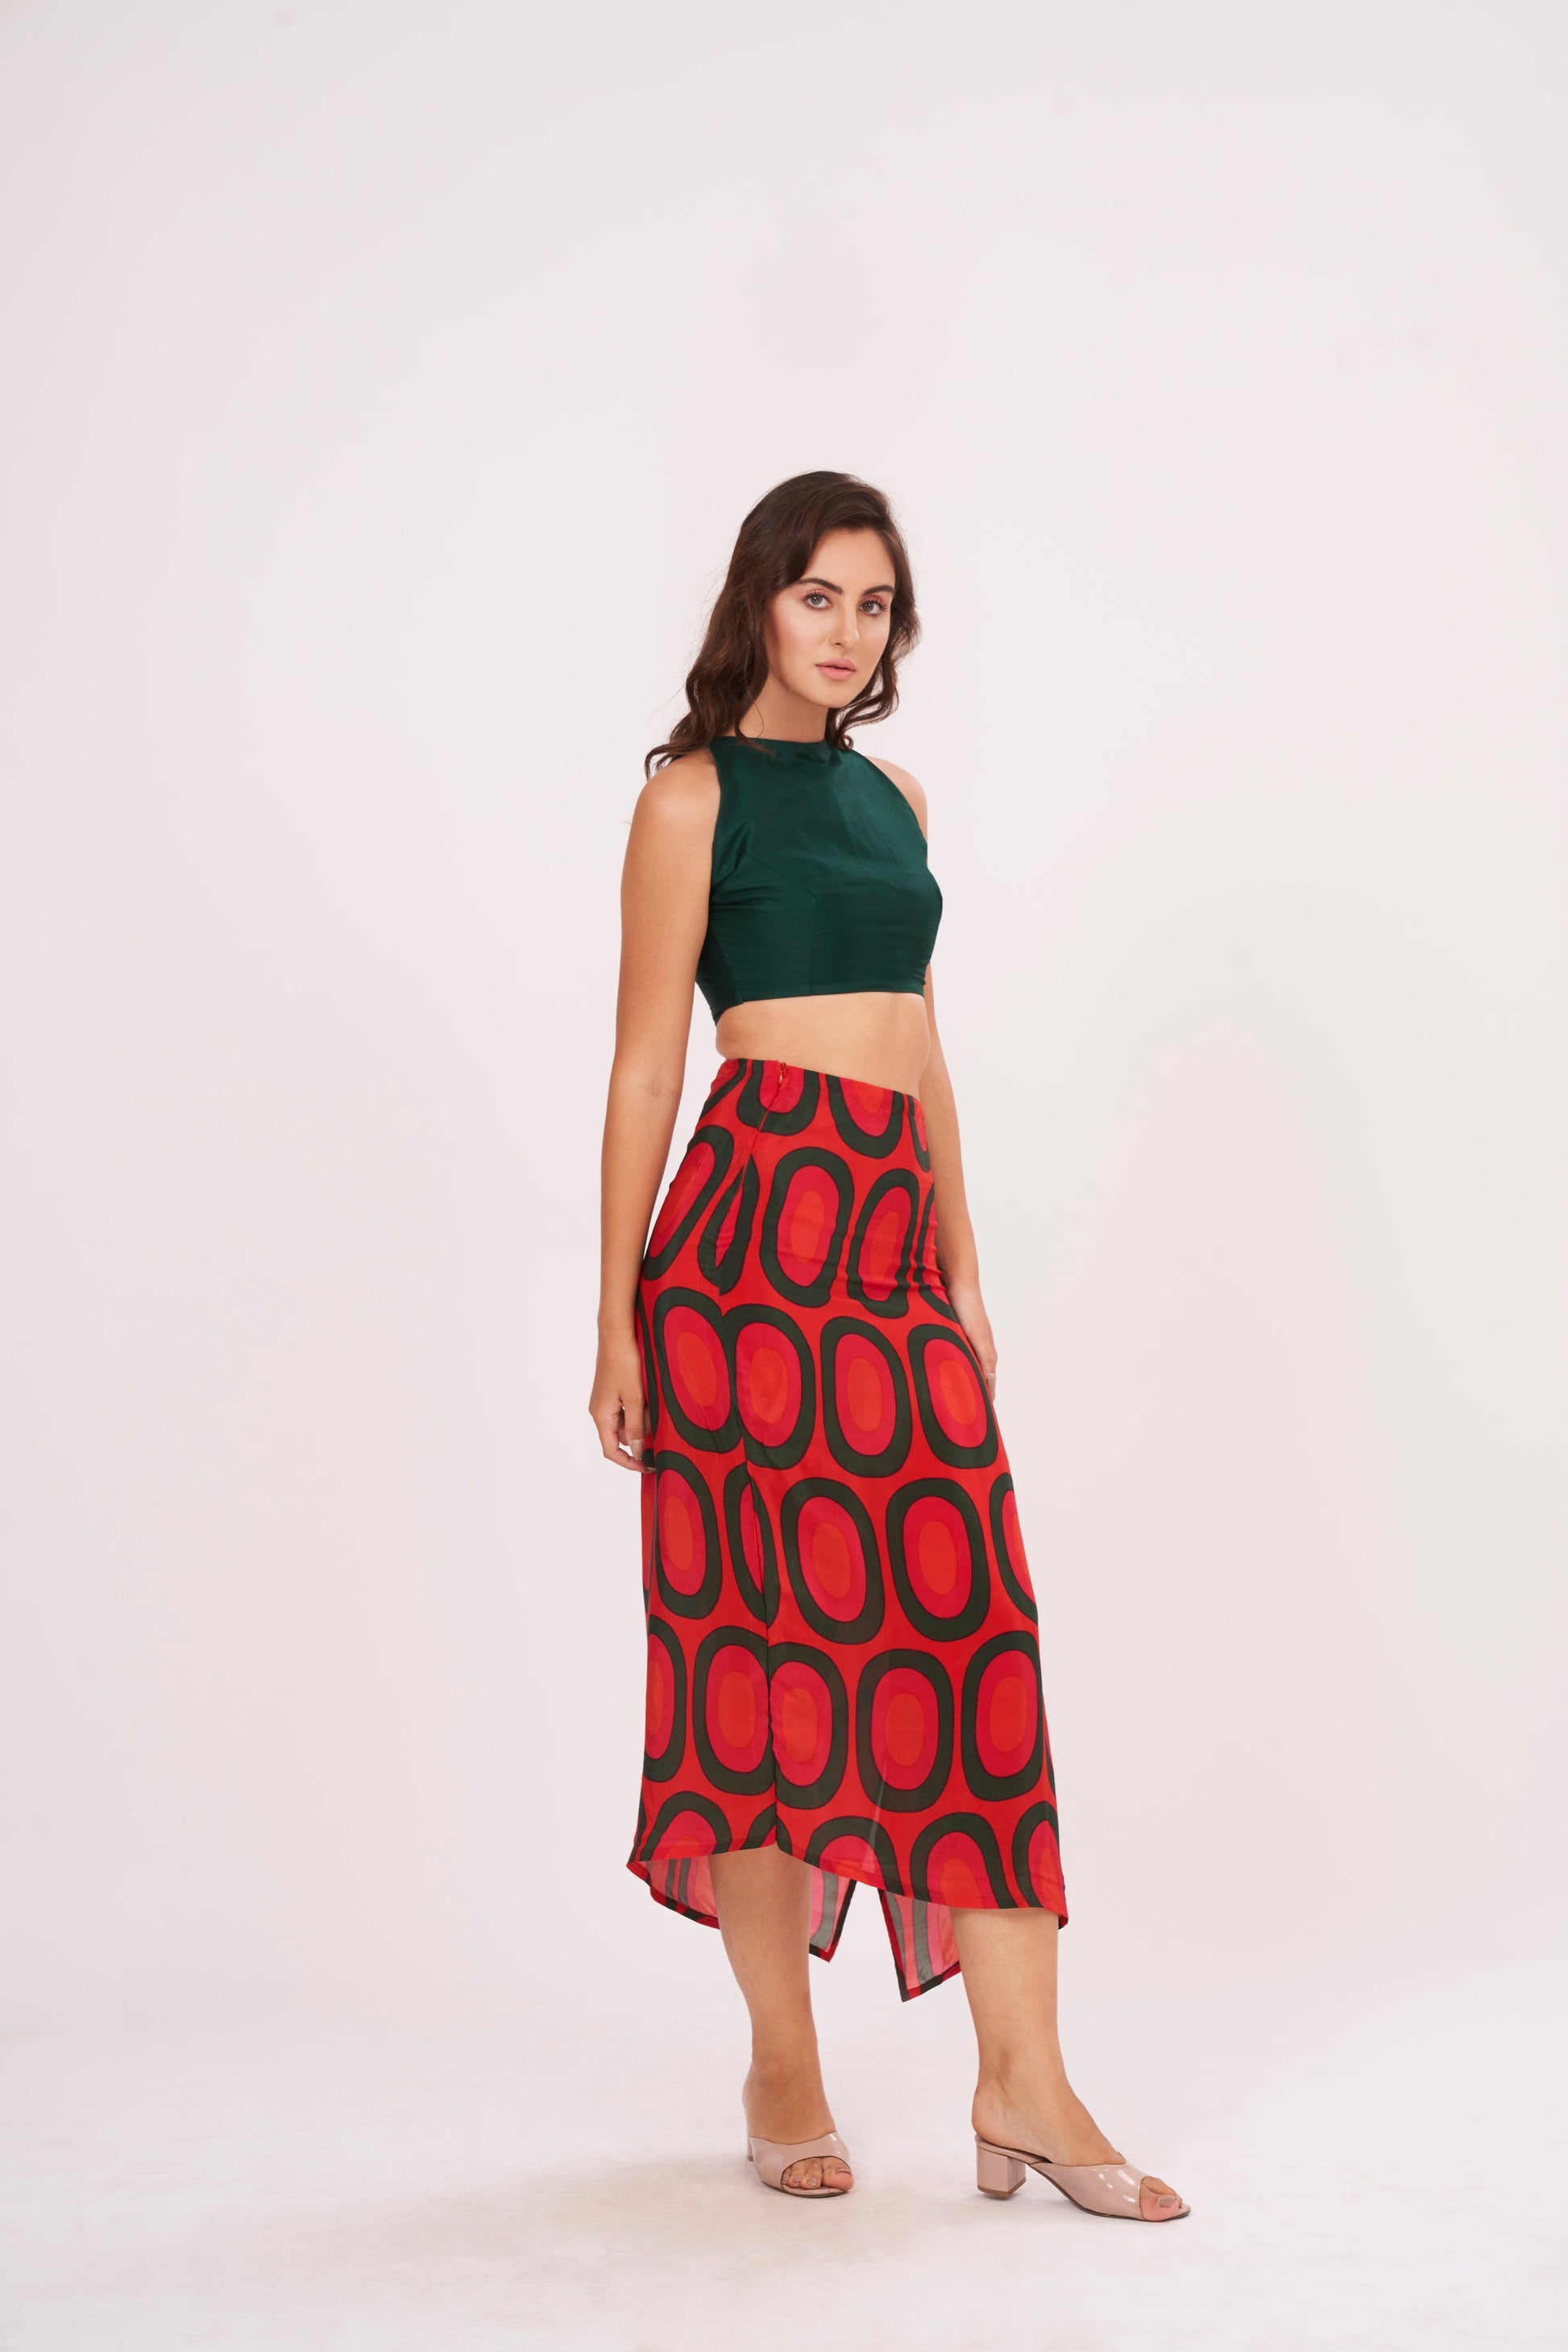 Fitted crop top with abstract design, made of durable crepe fabric, perfect for showcasing your style at any occasion.